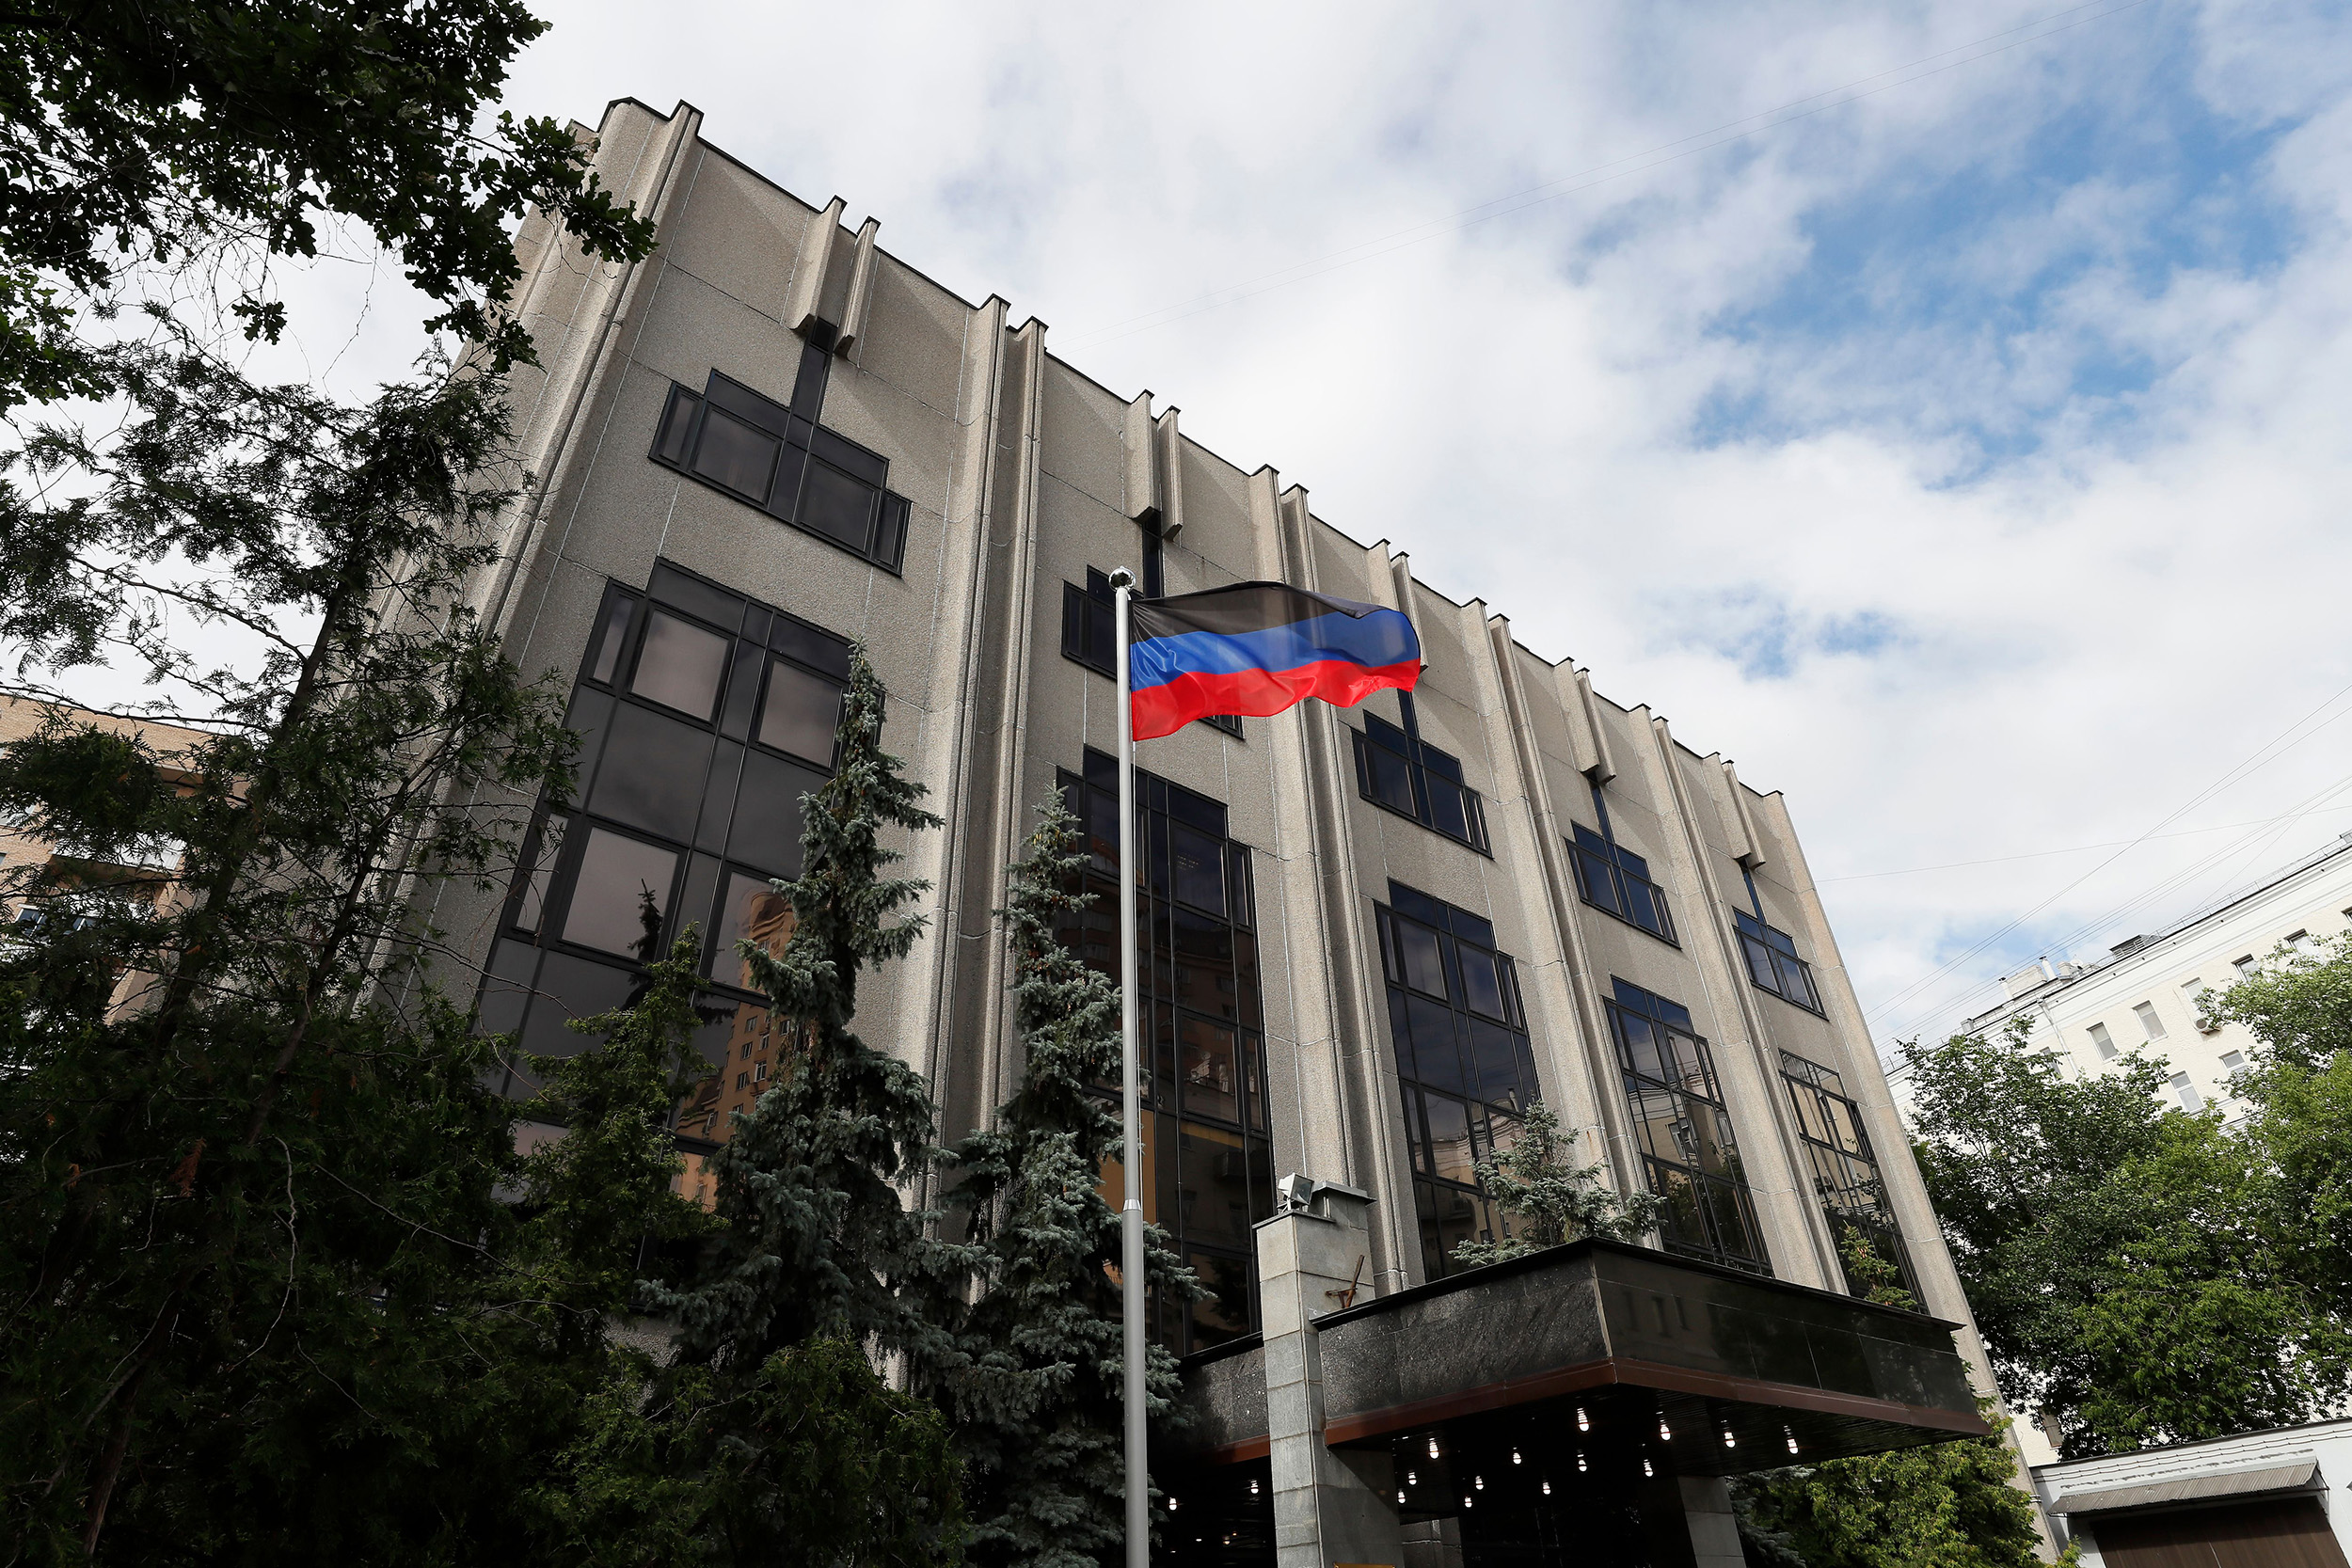 The flag of the self-proclaimed Donetsk People's Republic (DPR) on display outside the embassy following the official opening in Moscow on July 12.